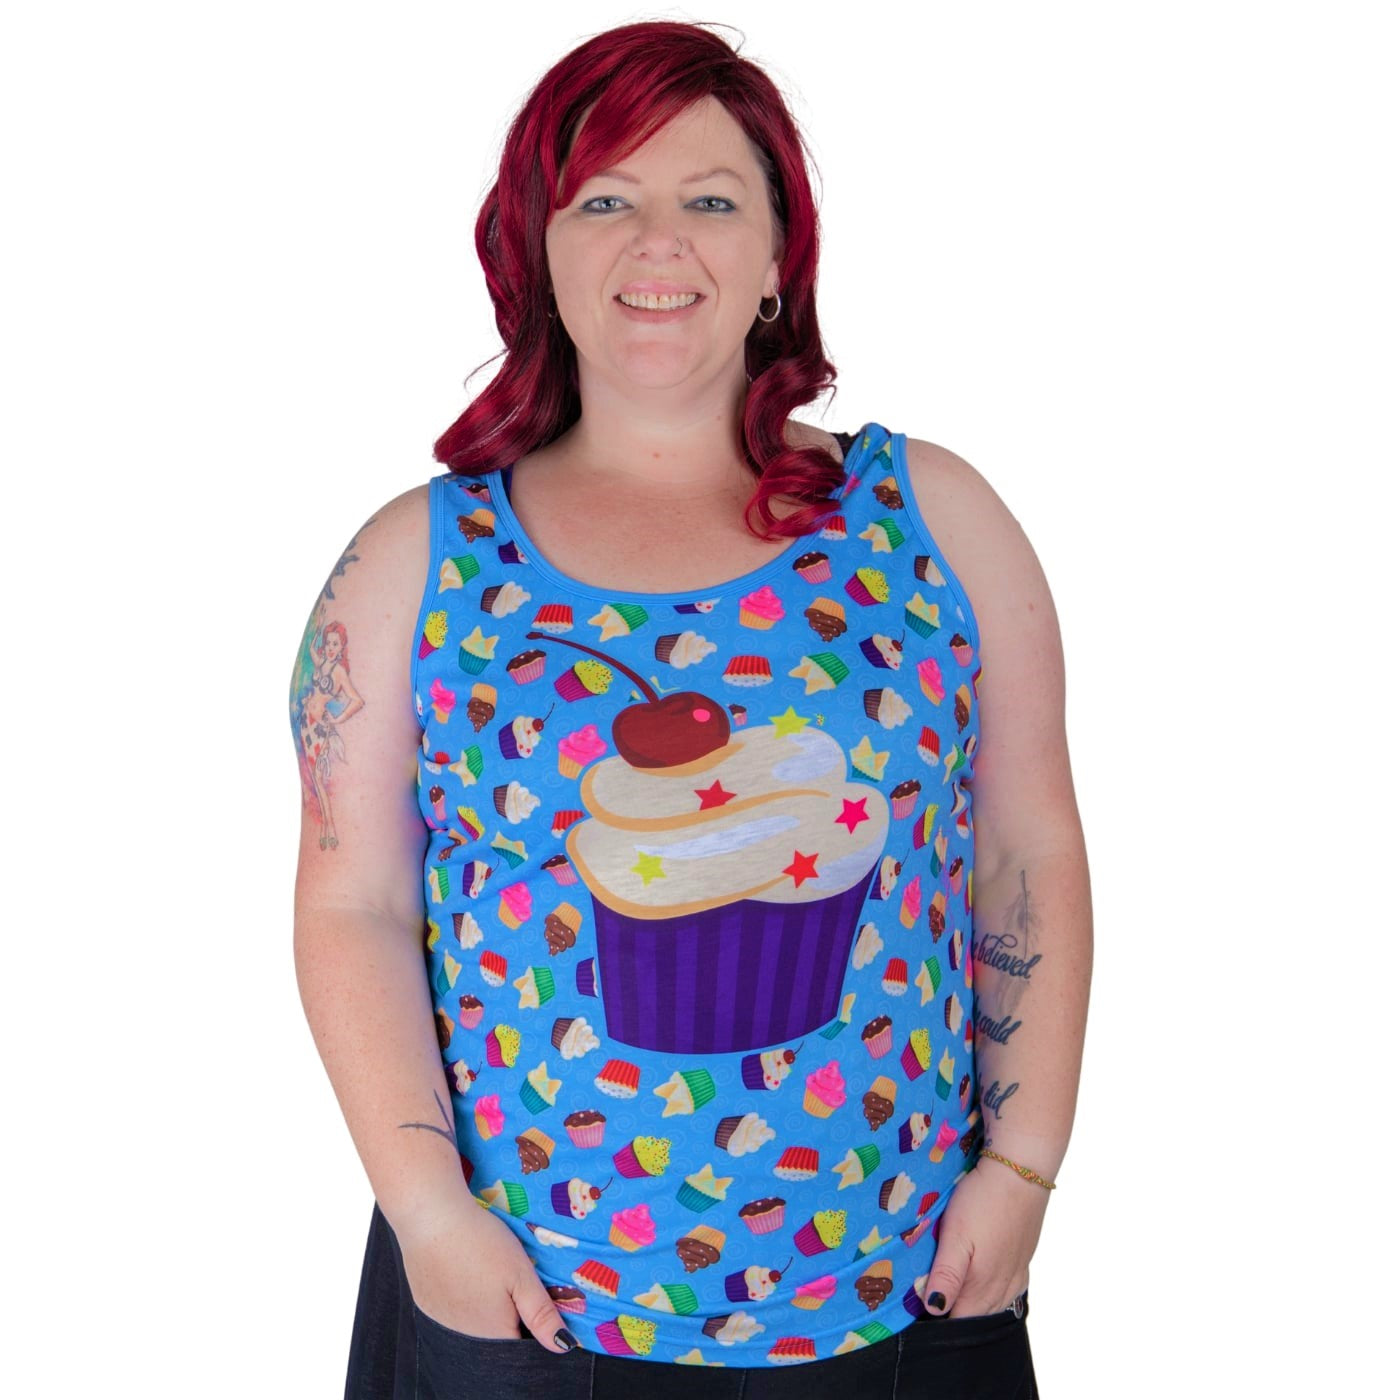 Patty Cakes Singlet Top by RainbowsAndFairies.com.au (Cupcakes - Cake - Kitsch - Vintage Inspired - Tank Top - Singlet Top - Party Food - Foodie - High Tea) - SKU: CL_SGLET_PATTY_ORG - Pic-02